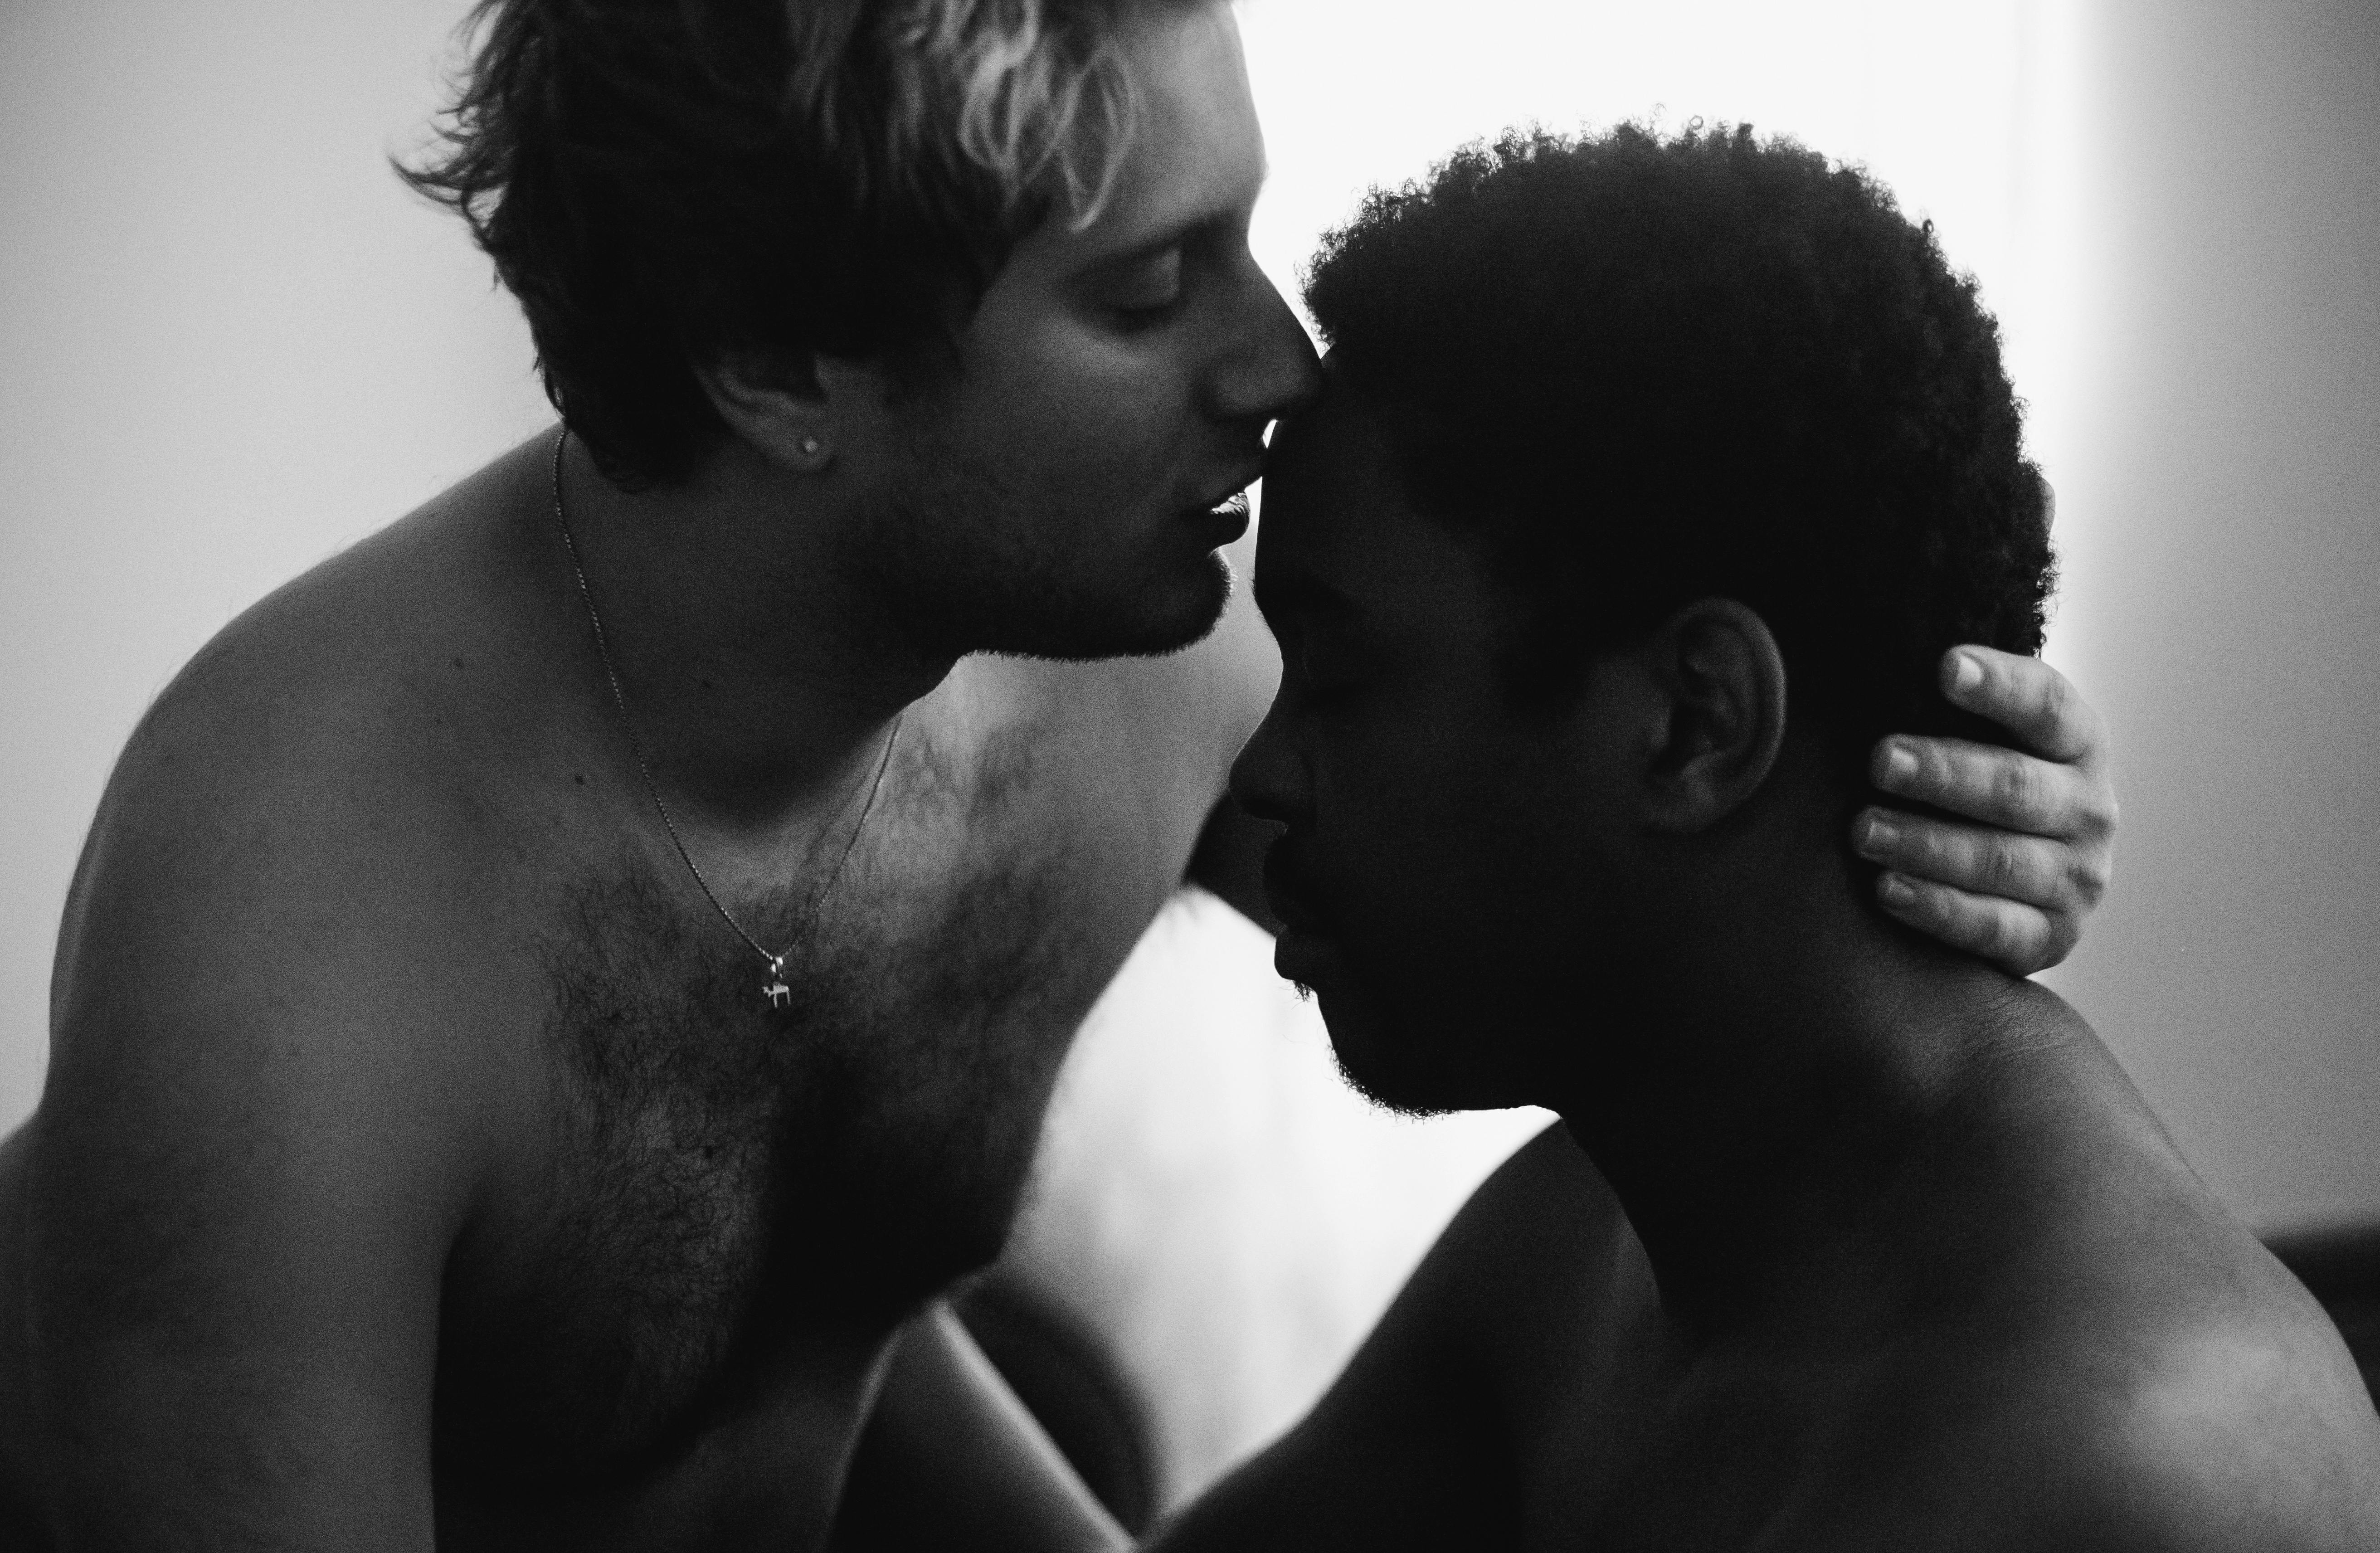 grayscale photo of a man kissing another man on the forehead